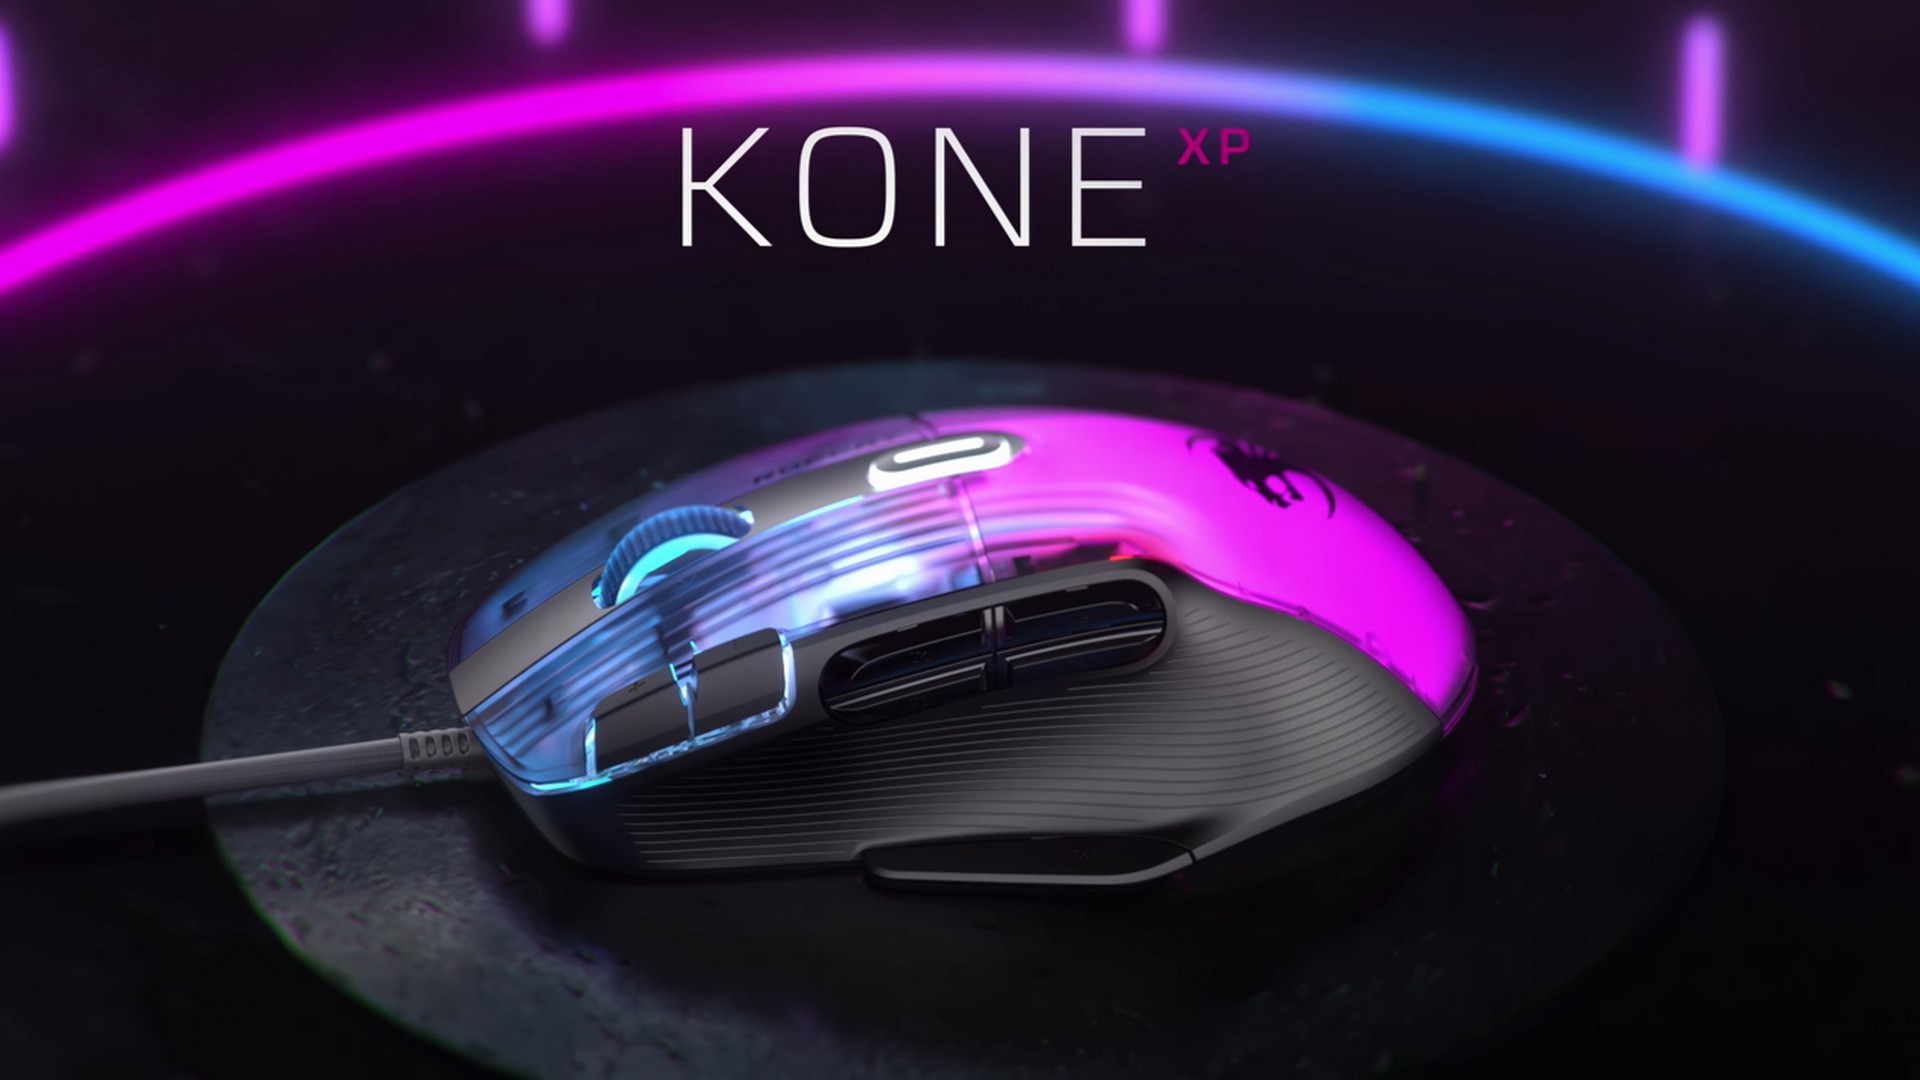 ROCCAT’S All-New KONE XP Refines The Brand’s Fan-Favorite Ergonomic Mouse Design With Top Specs & Stunning 3D RGB Lighting